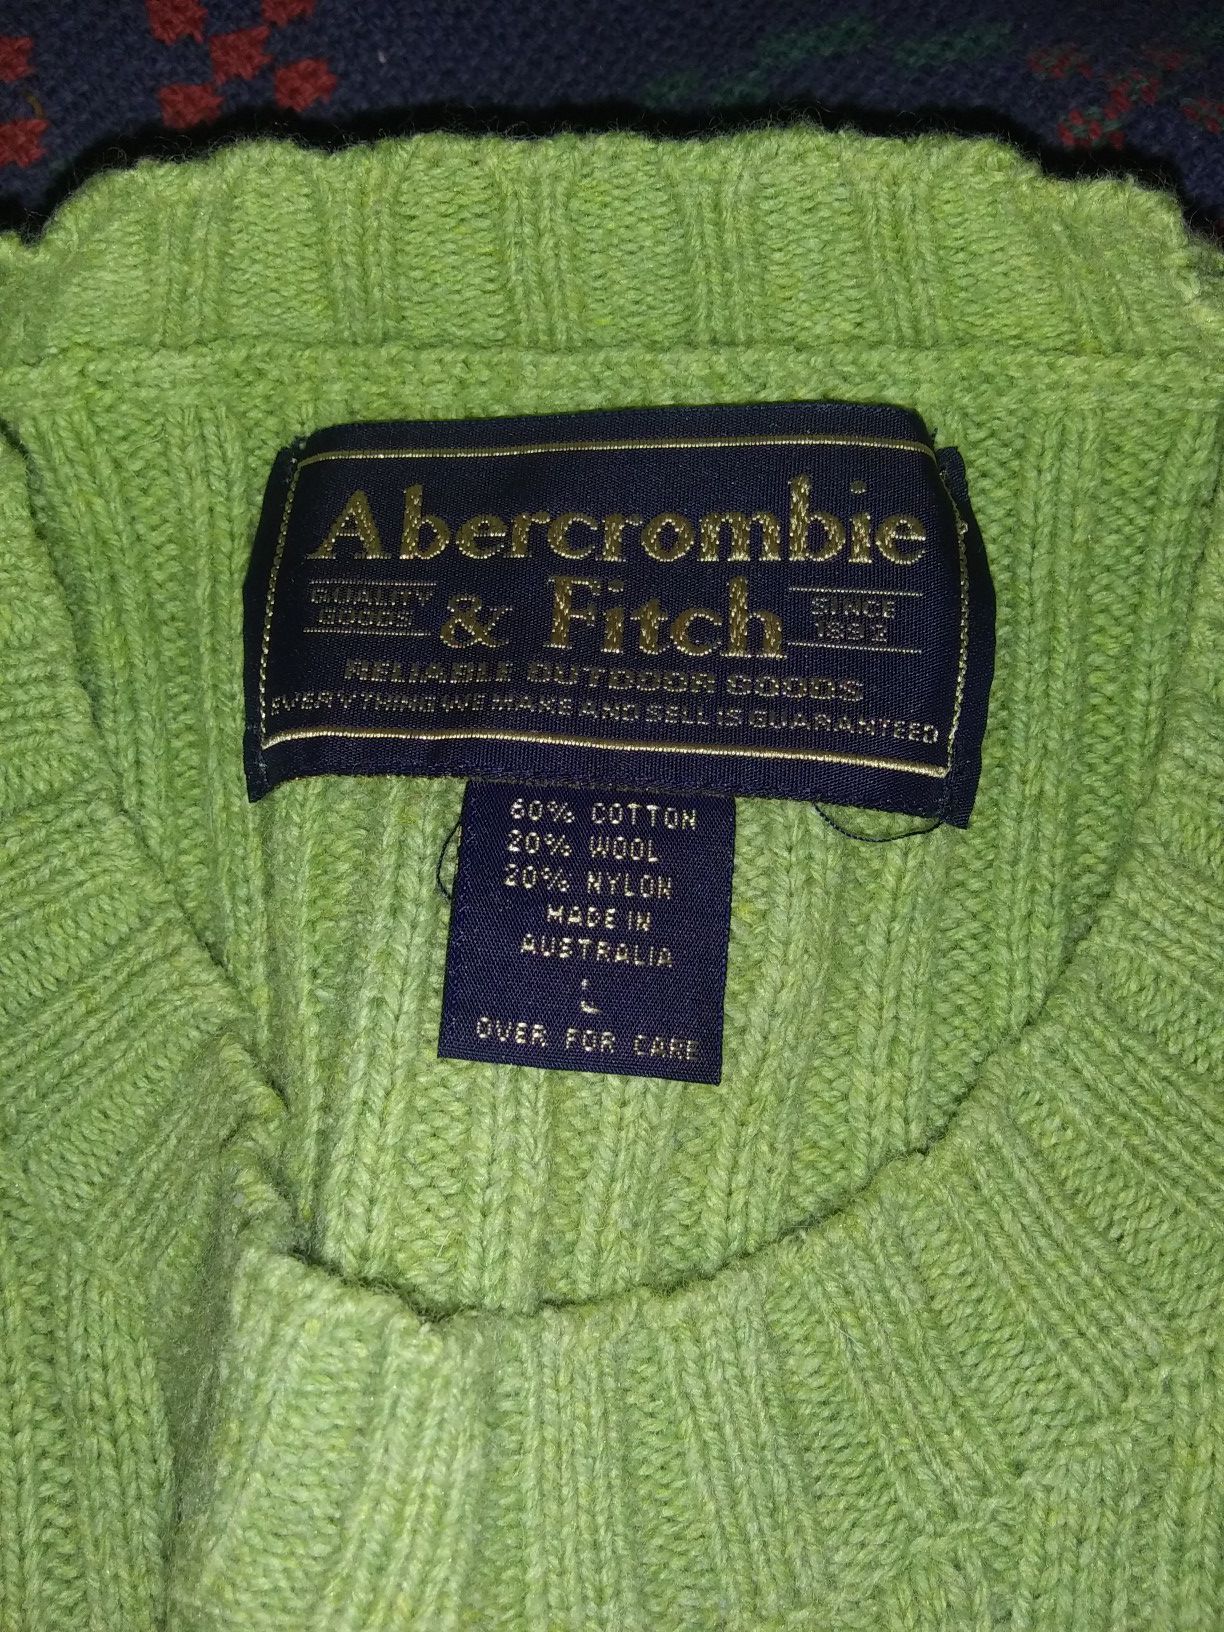 Abercrombie & fitch mens large sweaters brand new